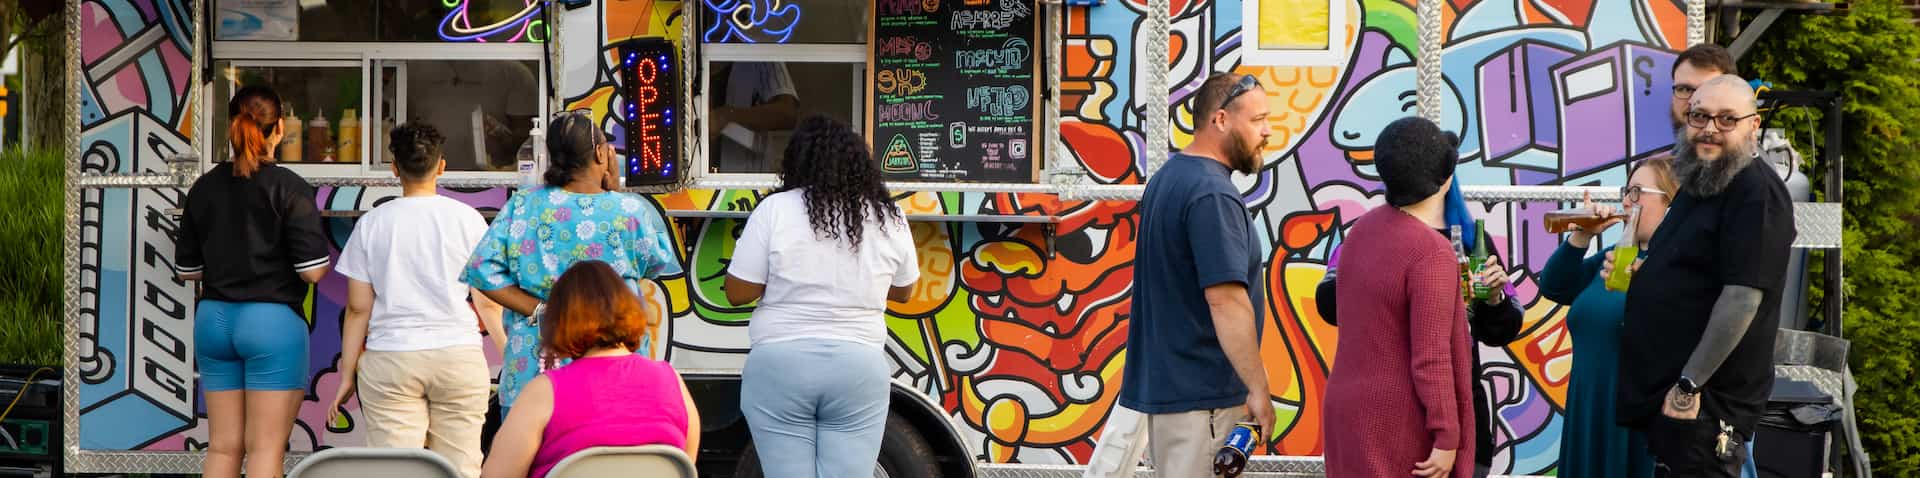 people lined up in front of food truck placing orders